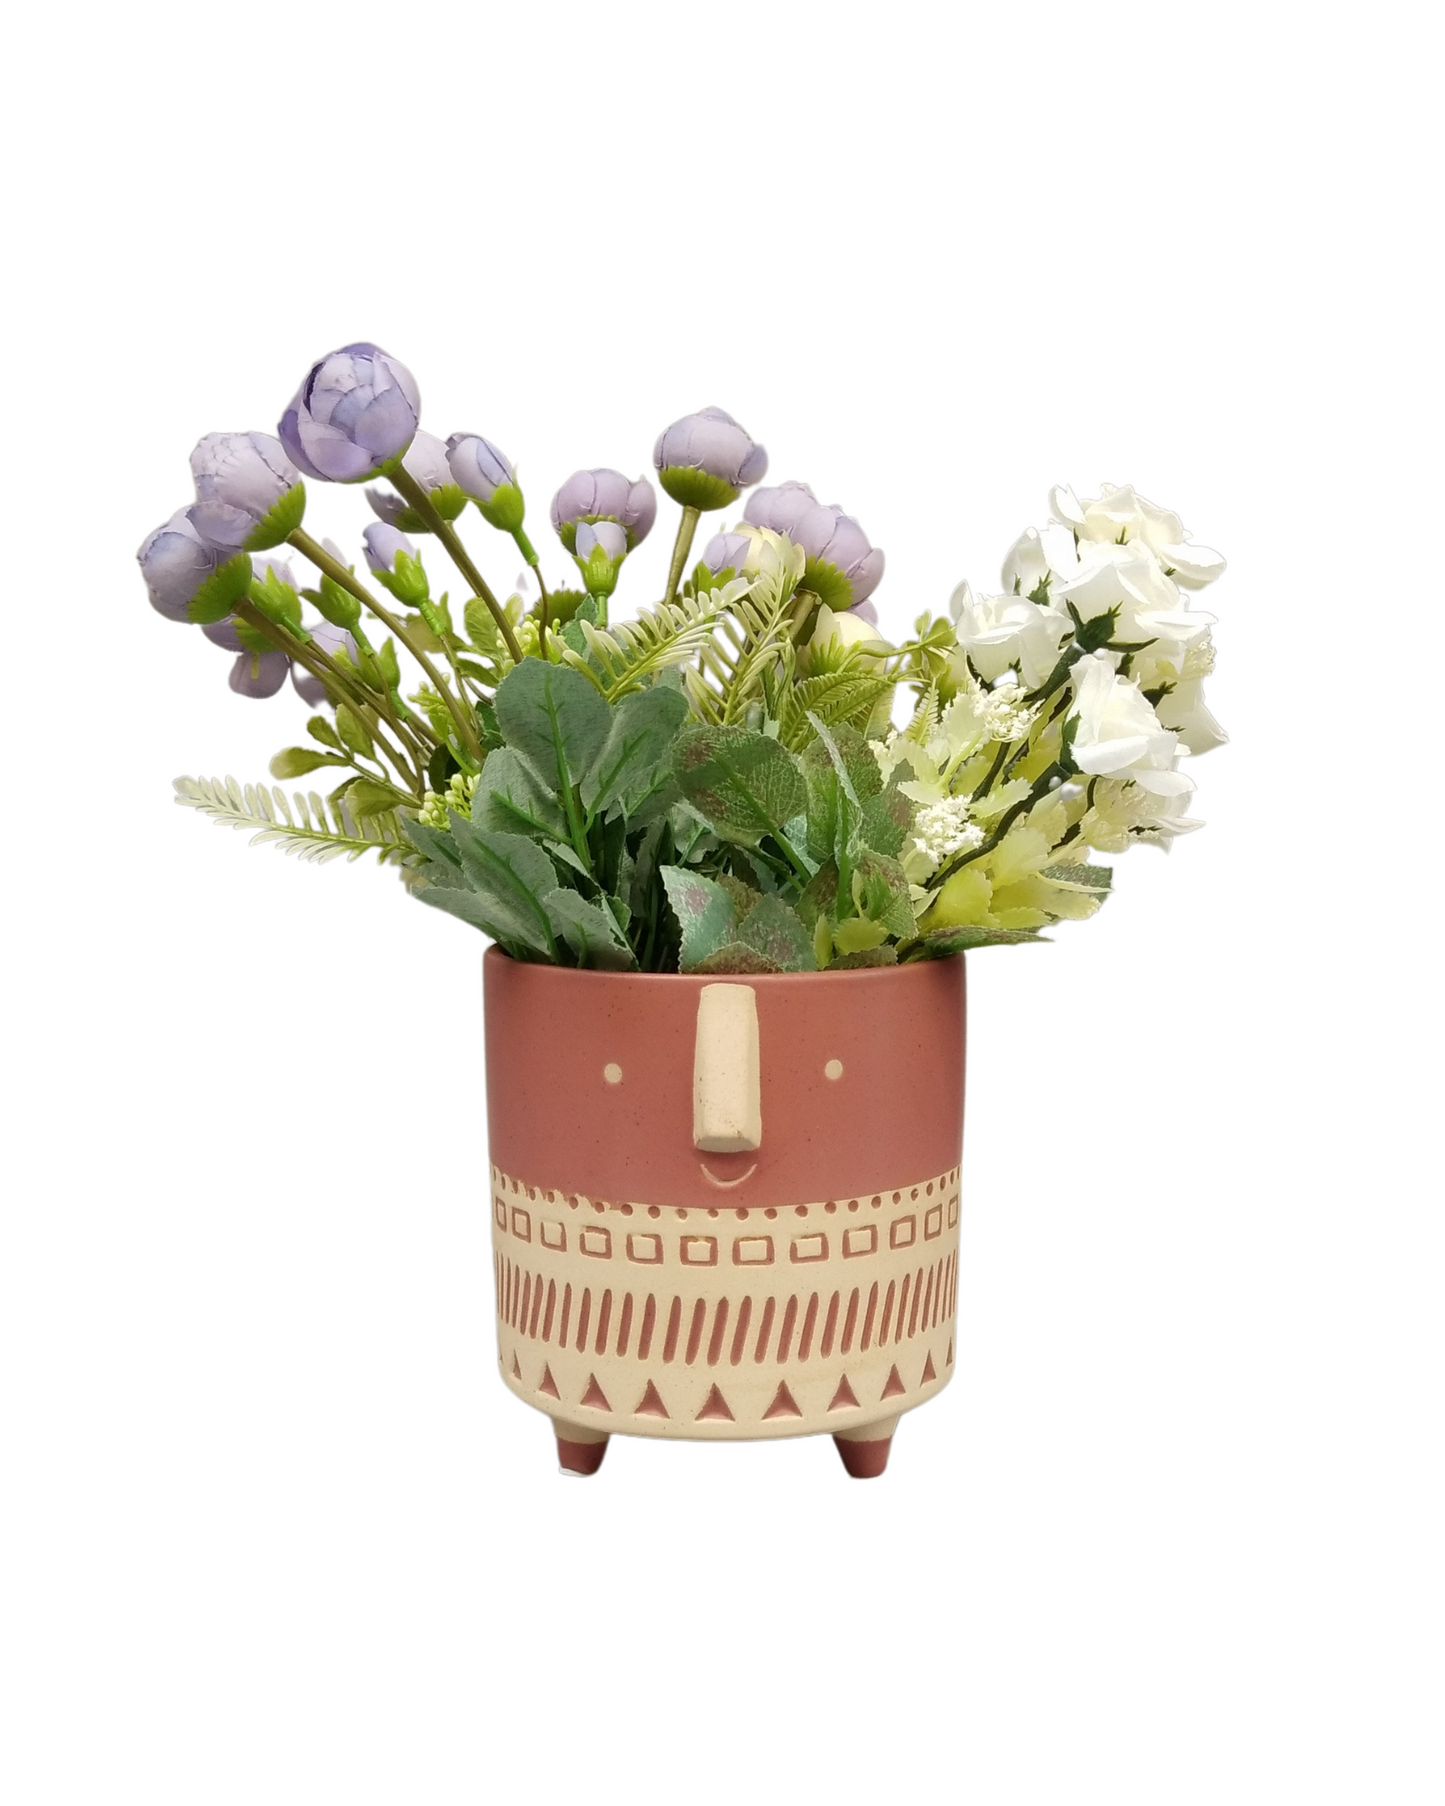 Ceramic Face Planter Pot - Available In 2 Colors